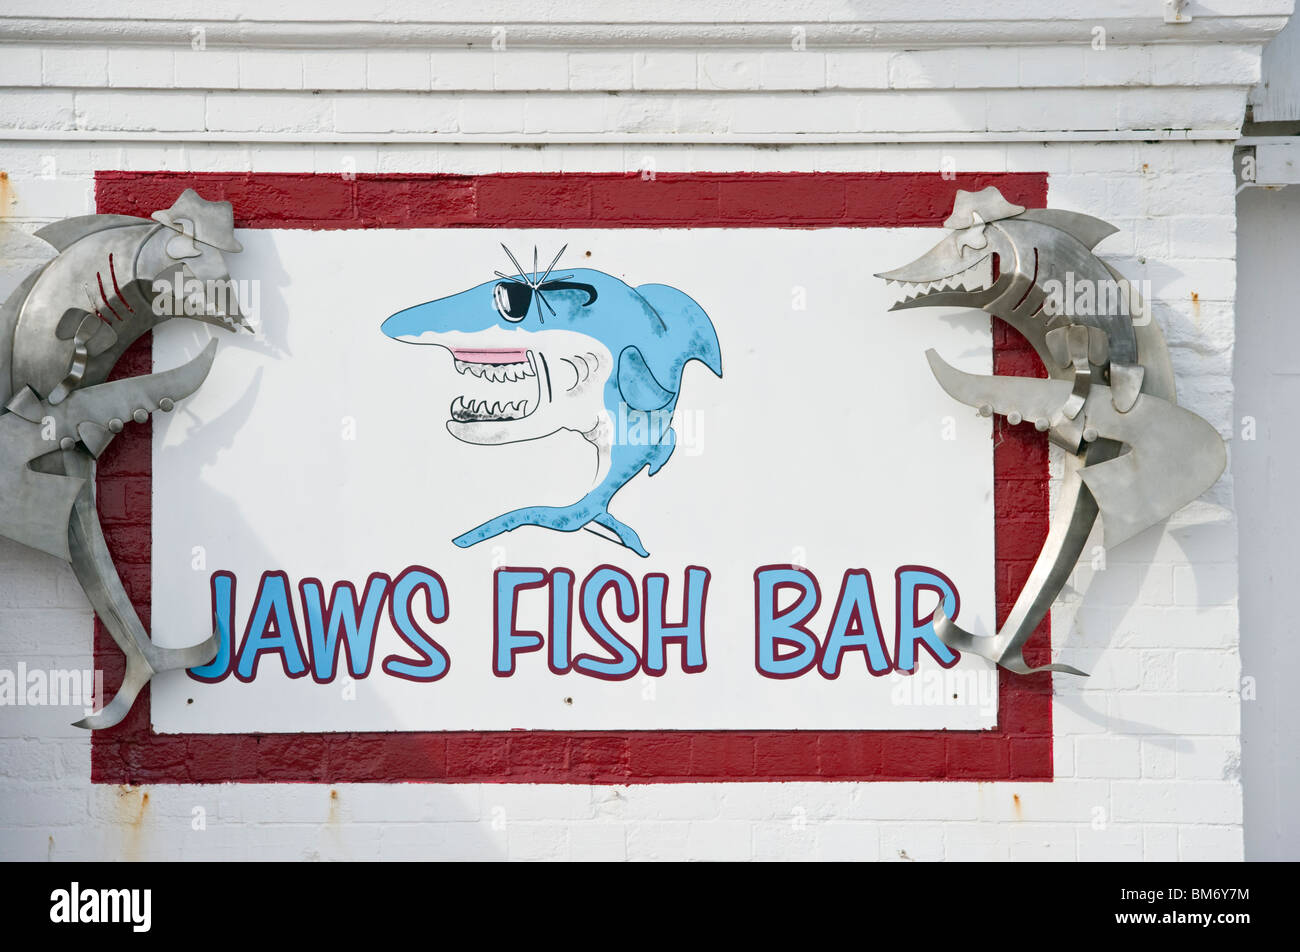 A fish bar sign depicting a shark cartoon character on Brighton front Sussex UK Stock Photo